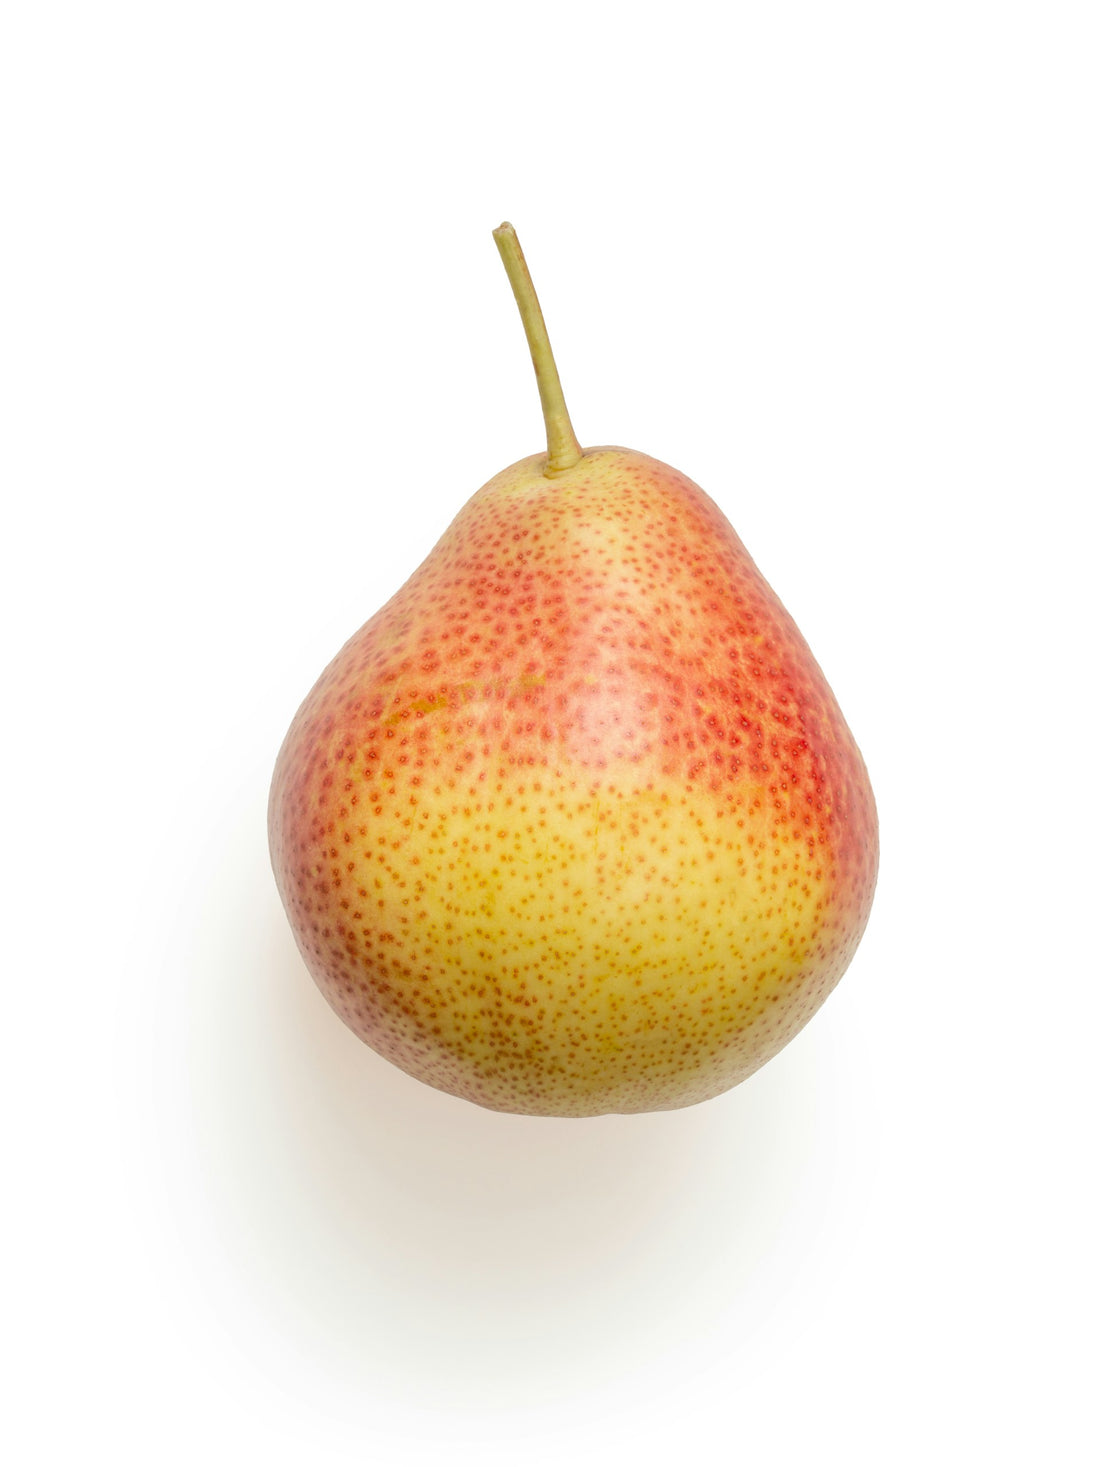 Are Pears Good for Diabetics